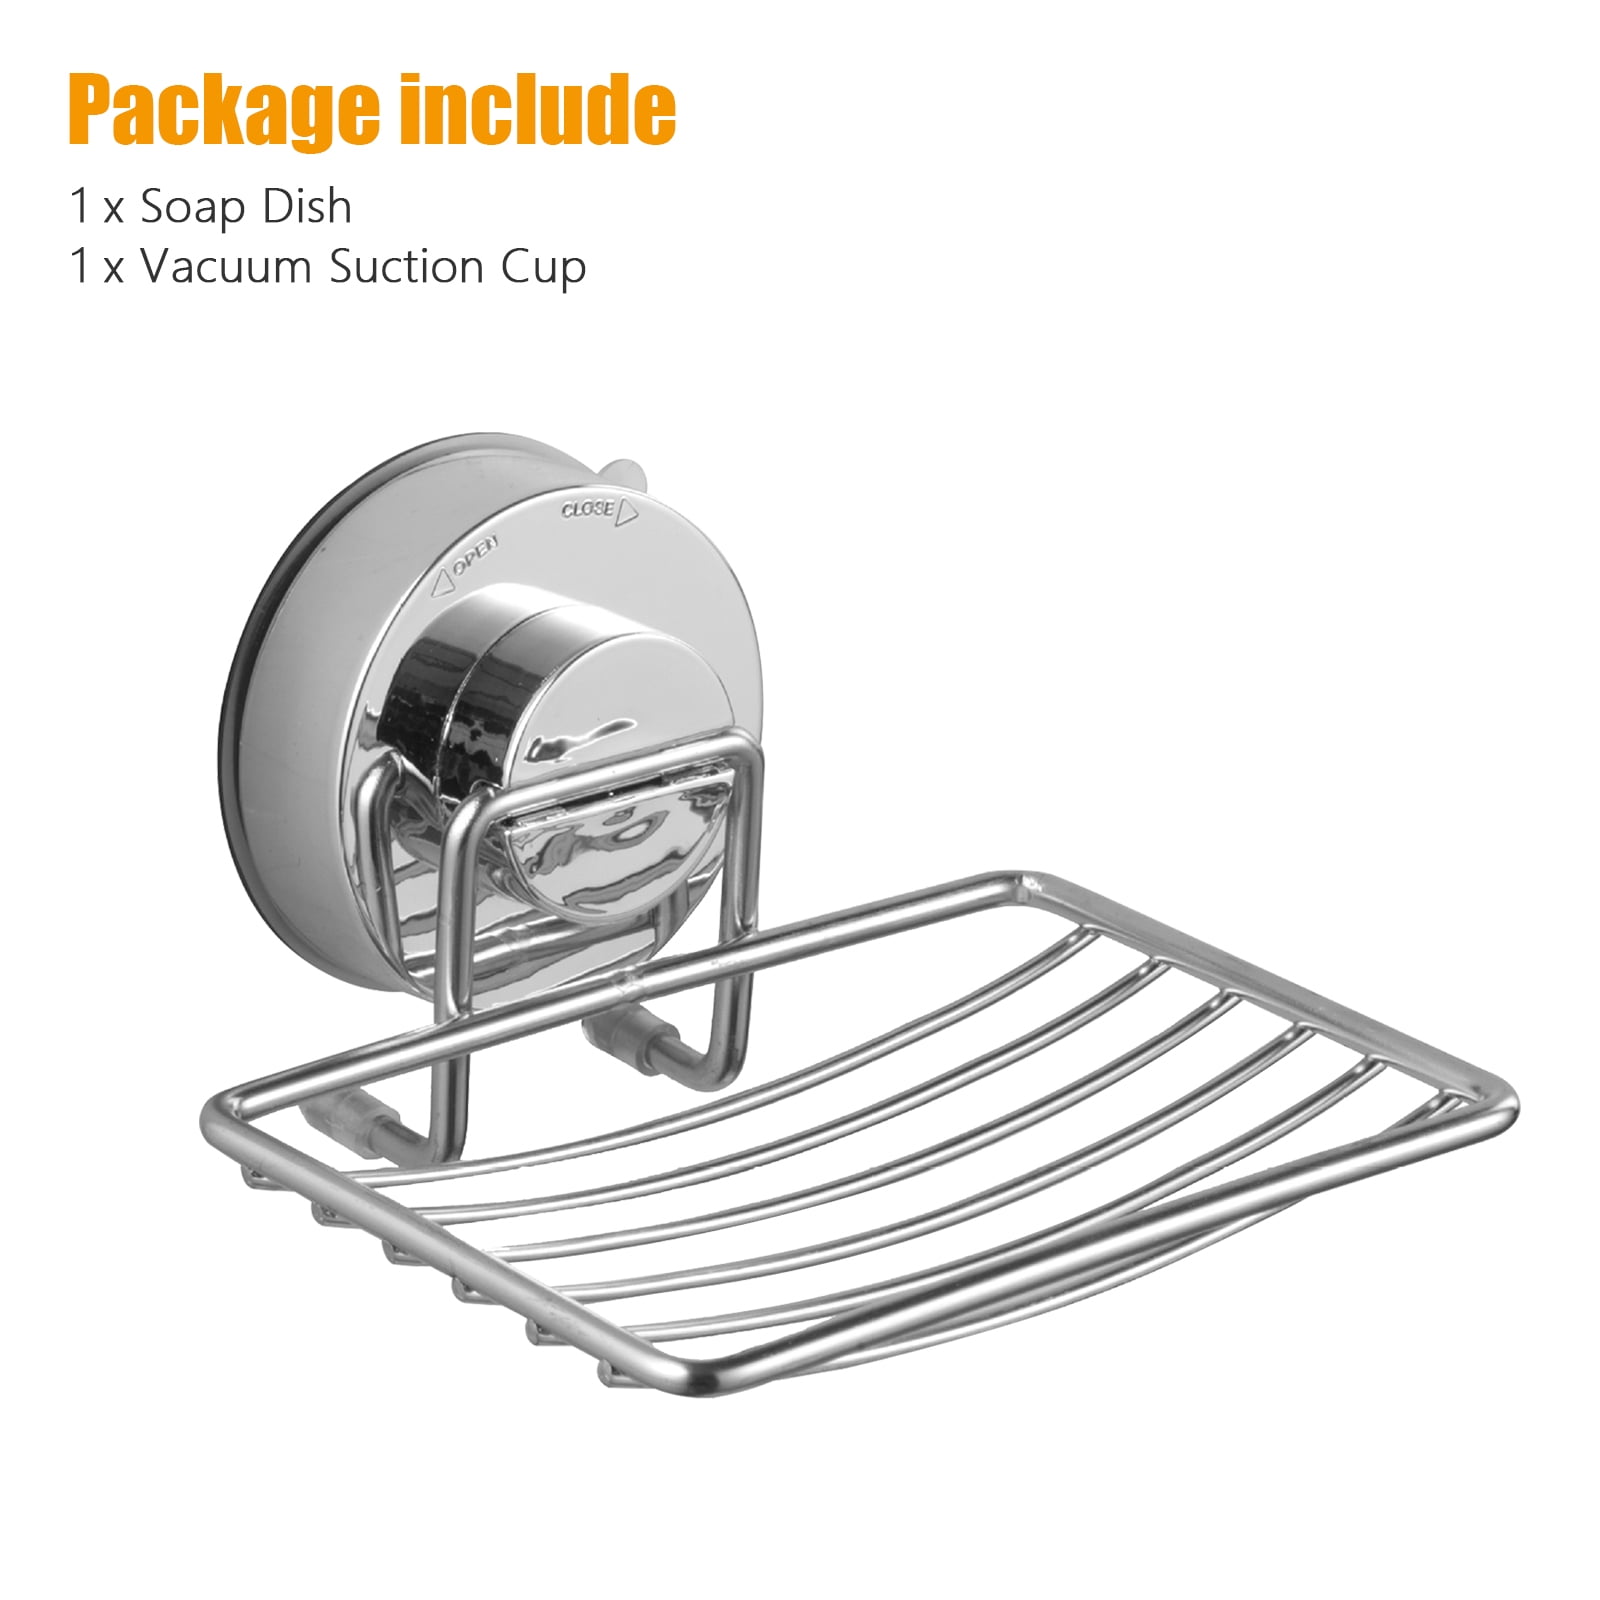 2 Pack Vacumn Soap Dish Holder & Suction Cup Hook For Bathroom Tub Kitchen Sink 